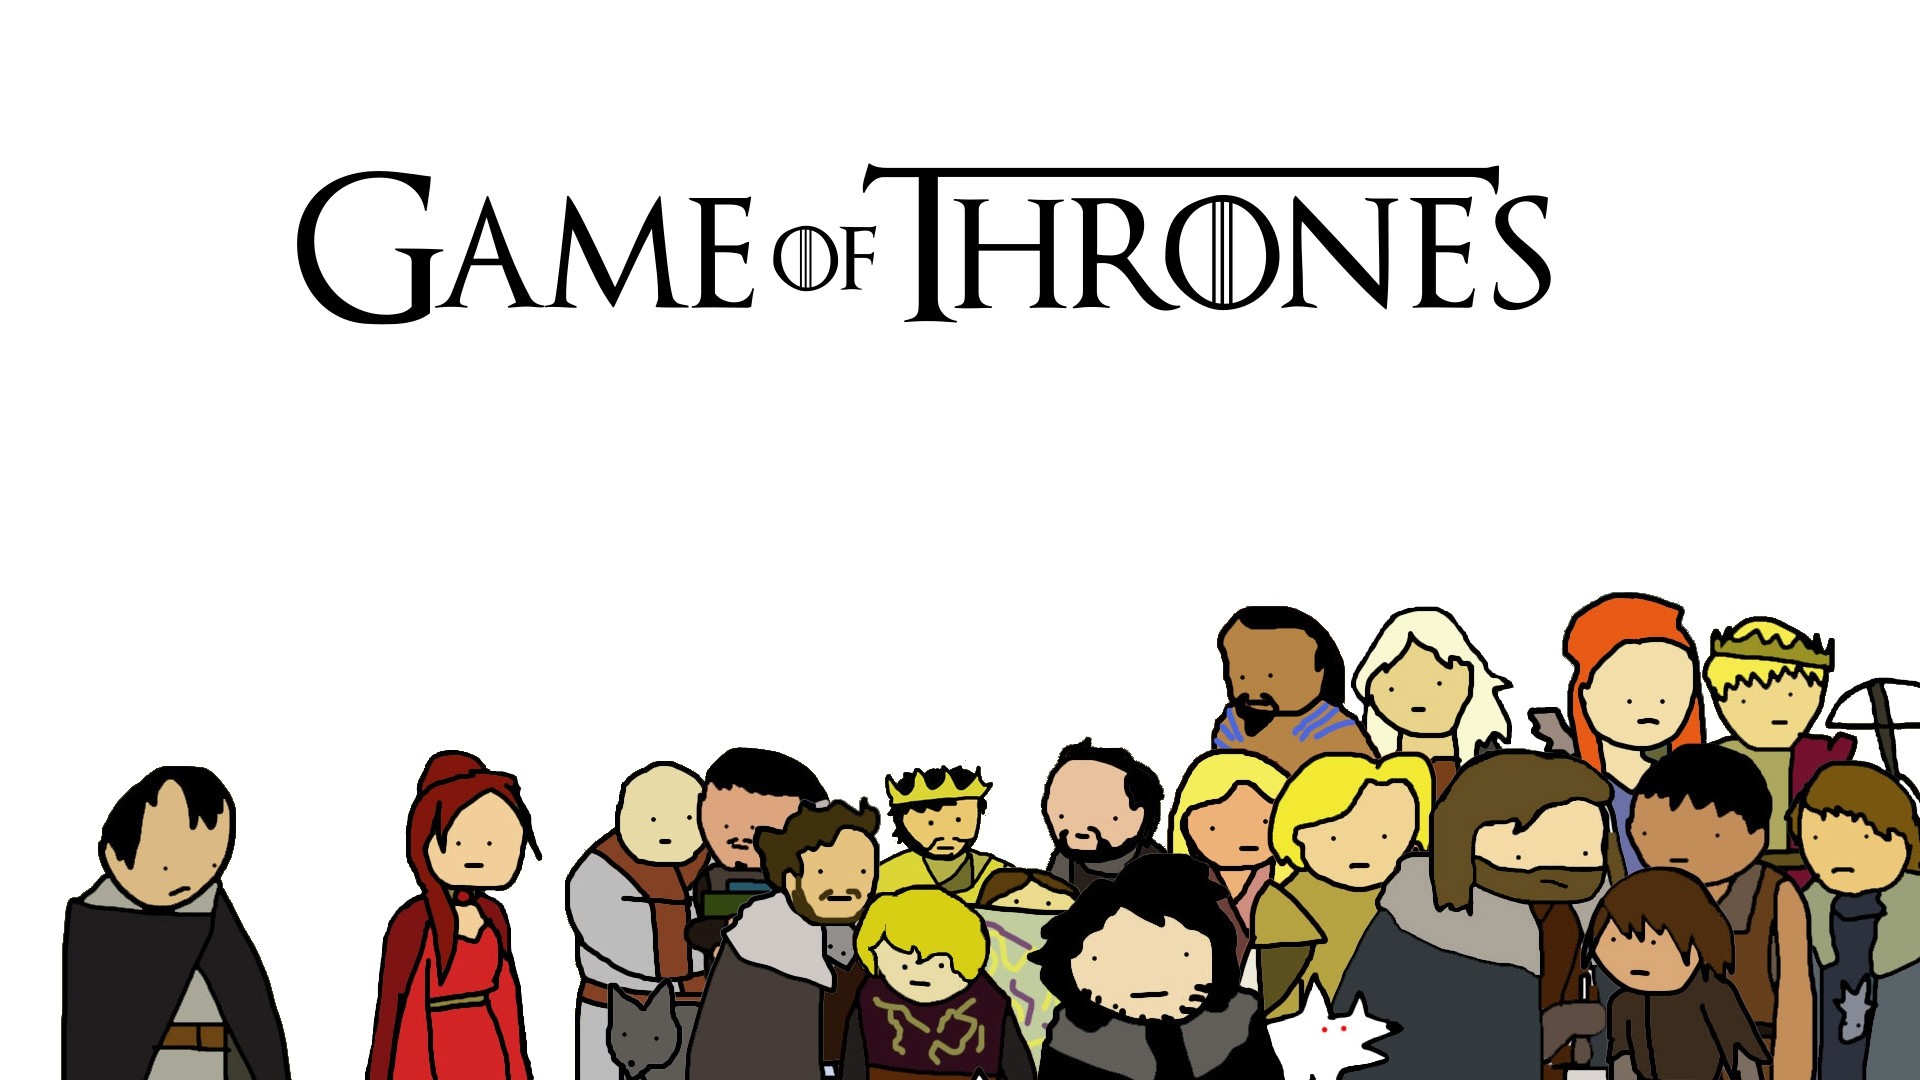 General 1920x1080 Game of Thrones artwork white background TV series